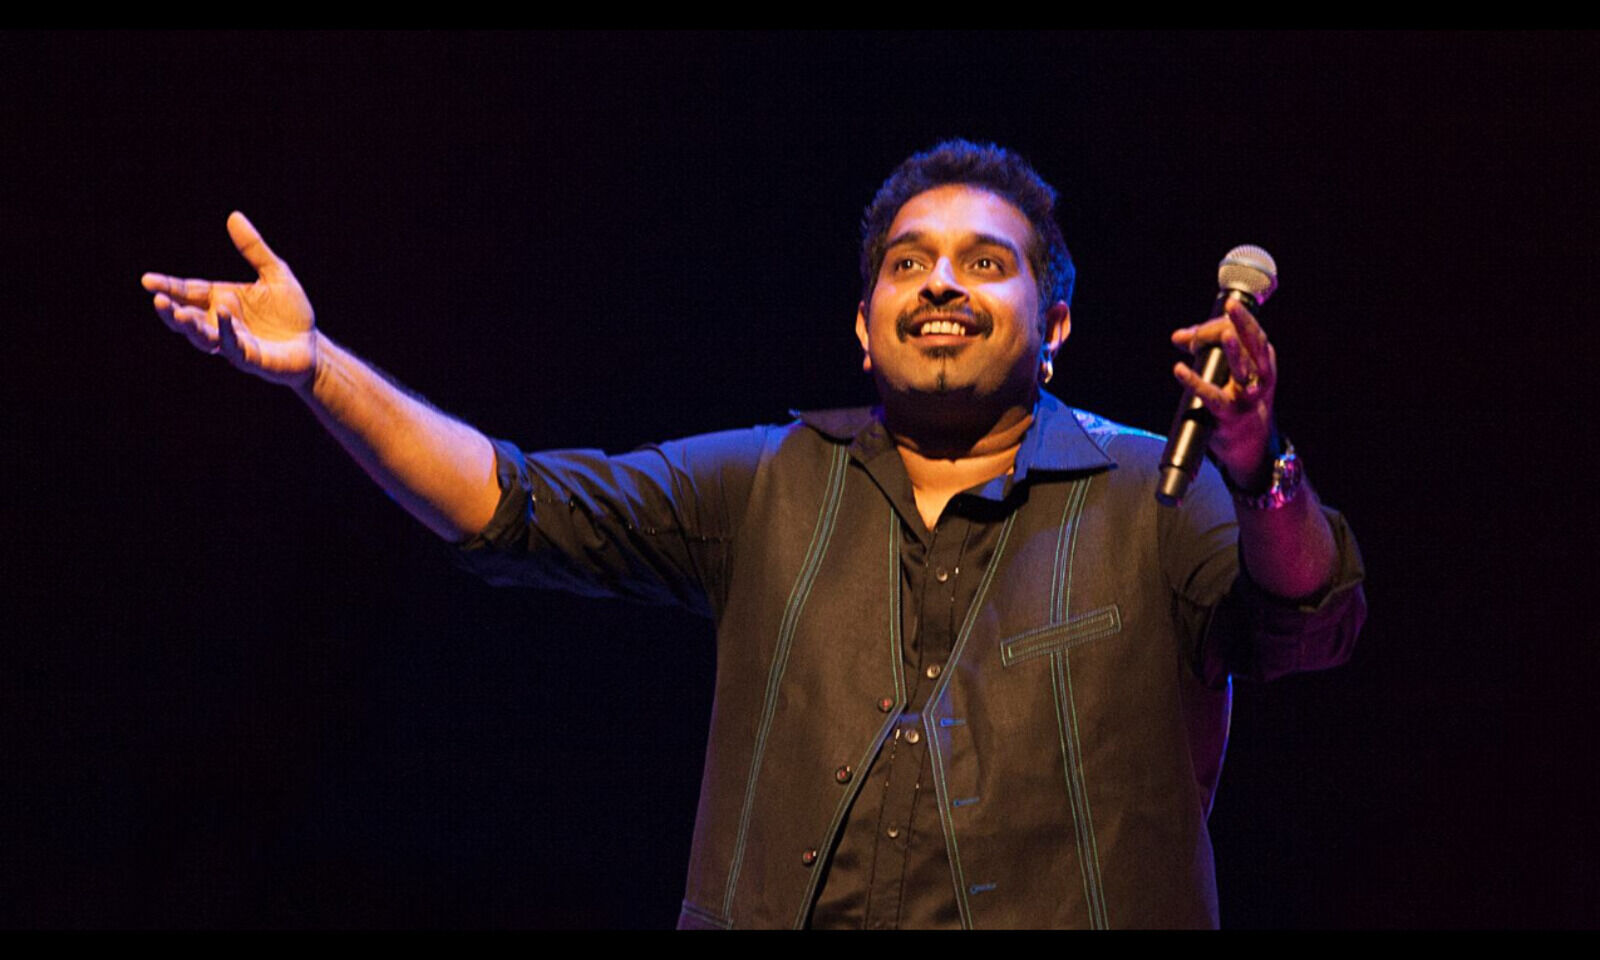 Bollywood News: Shankar Mahadevan Conferred with Coveted Honorary Doctorate by Prominent UK University